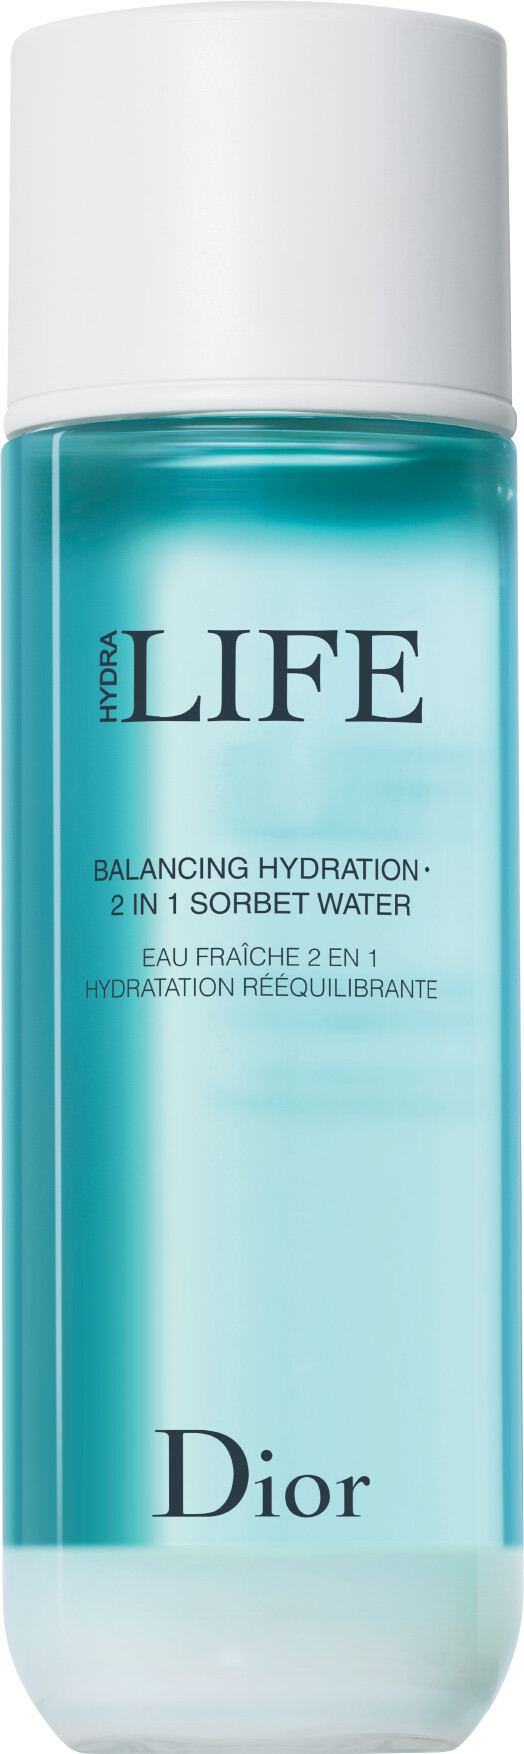 balancing hydration 2 in 1 sorbet water